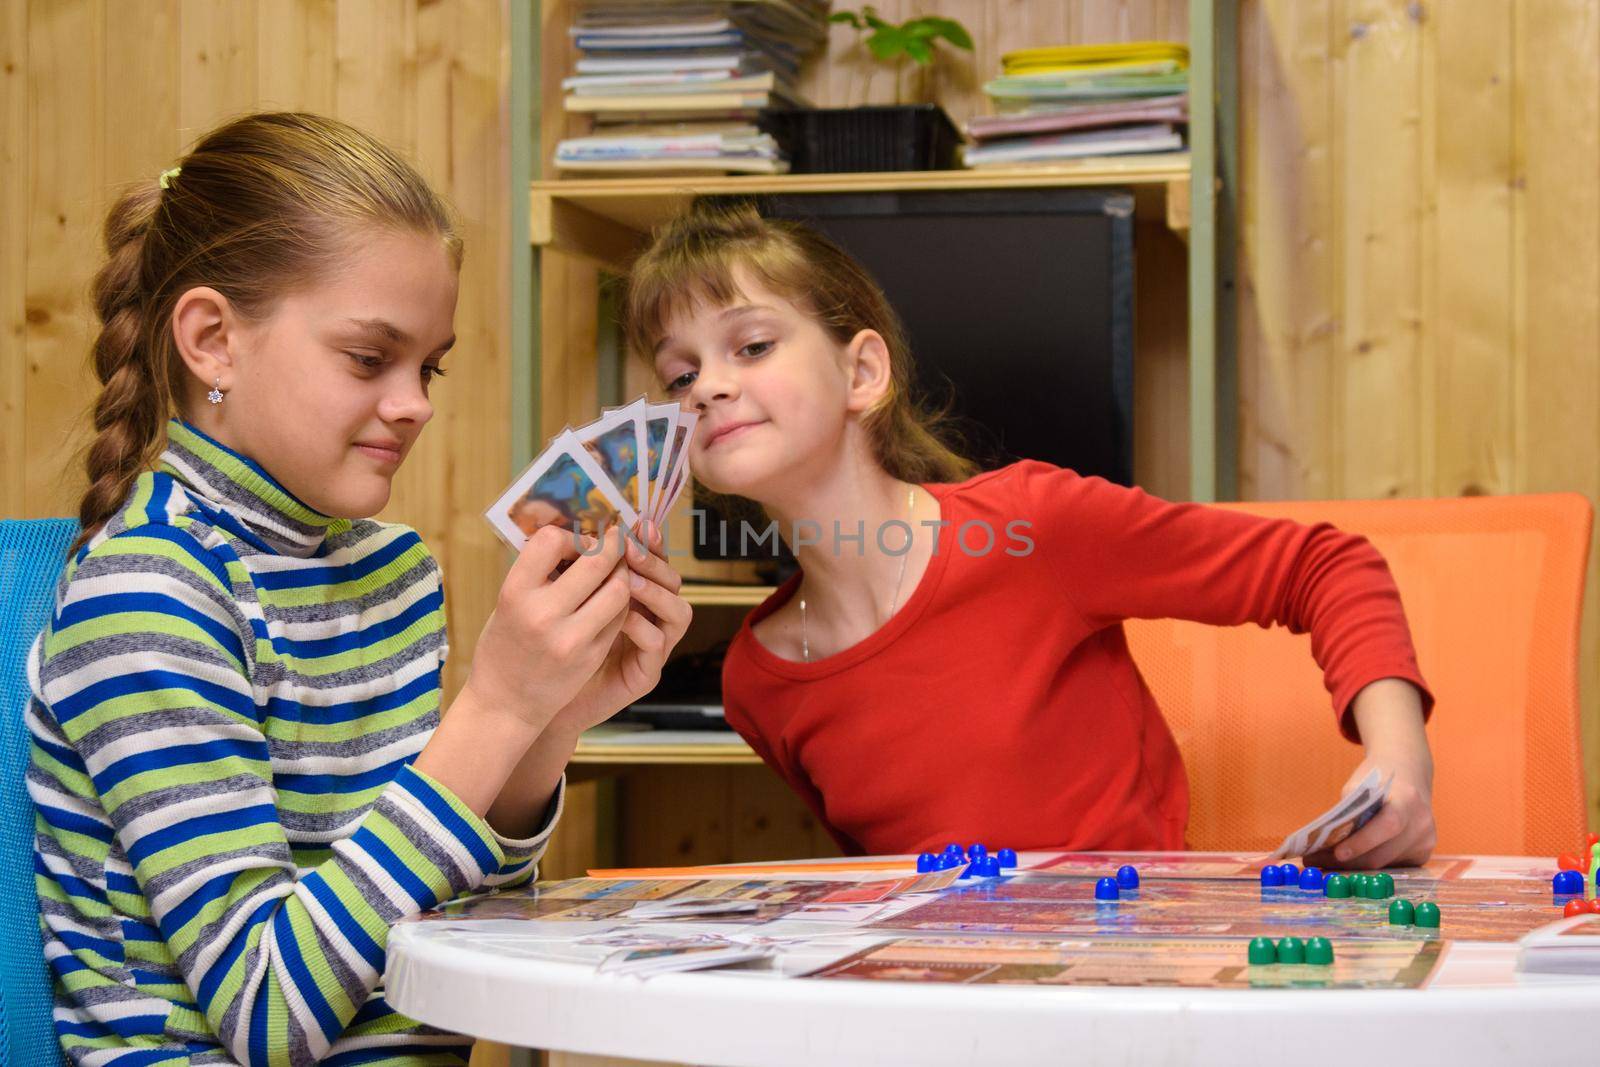 Children play a board game, one of the girls peeps at the cards of the other